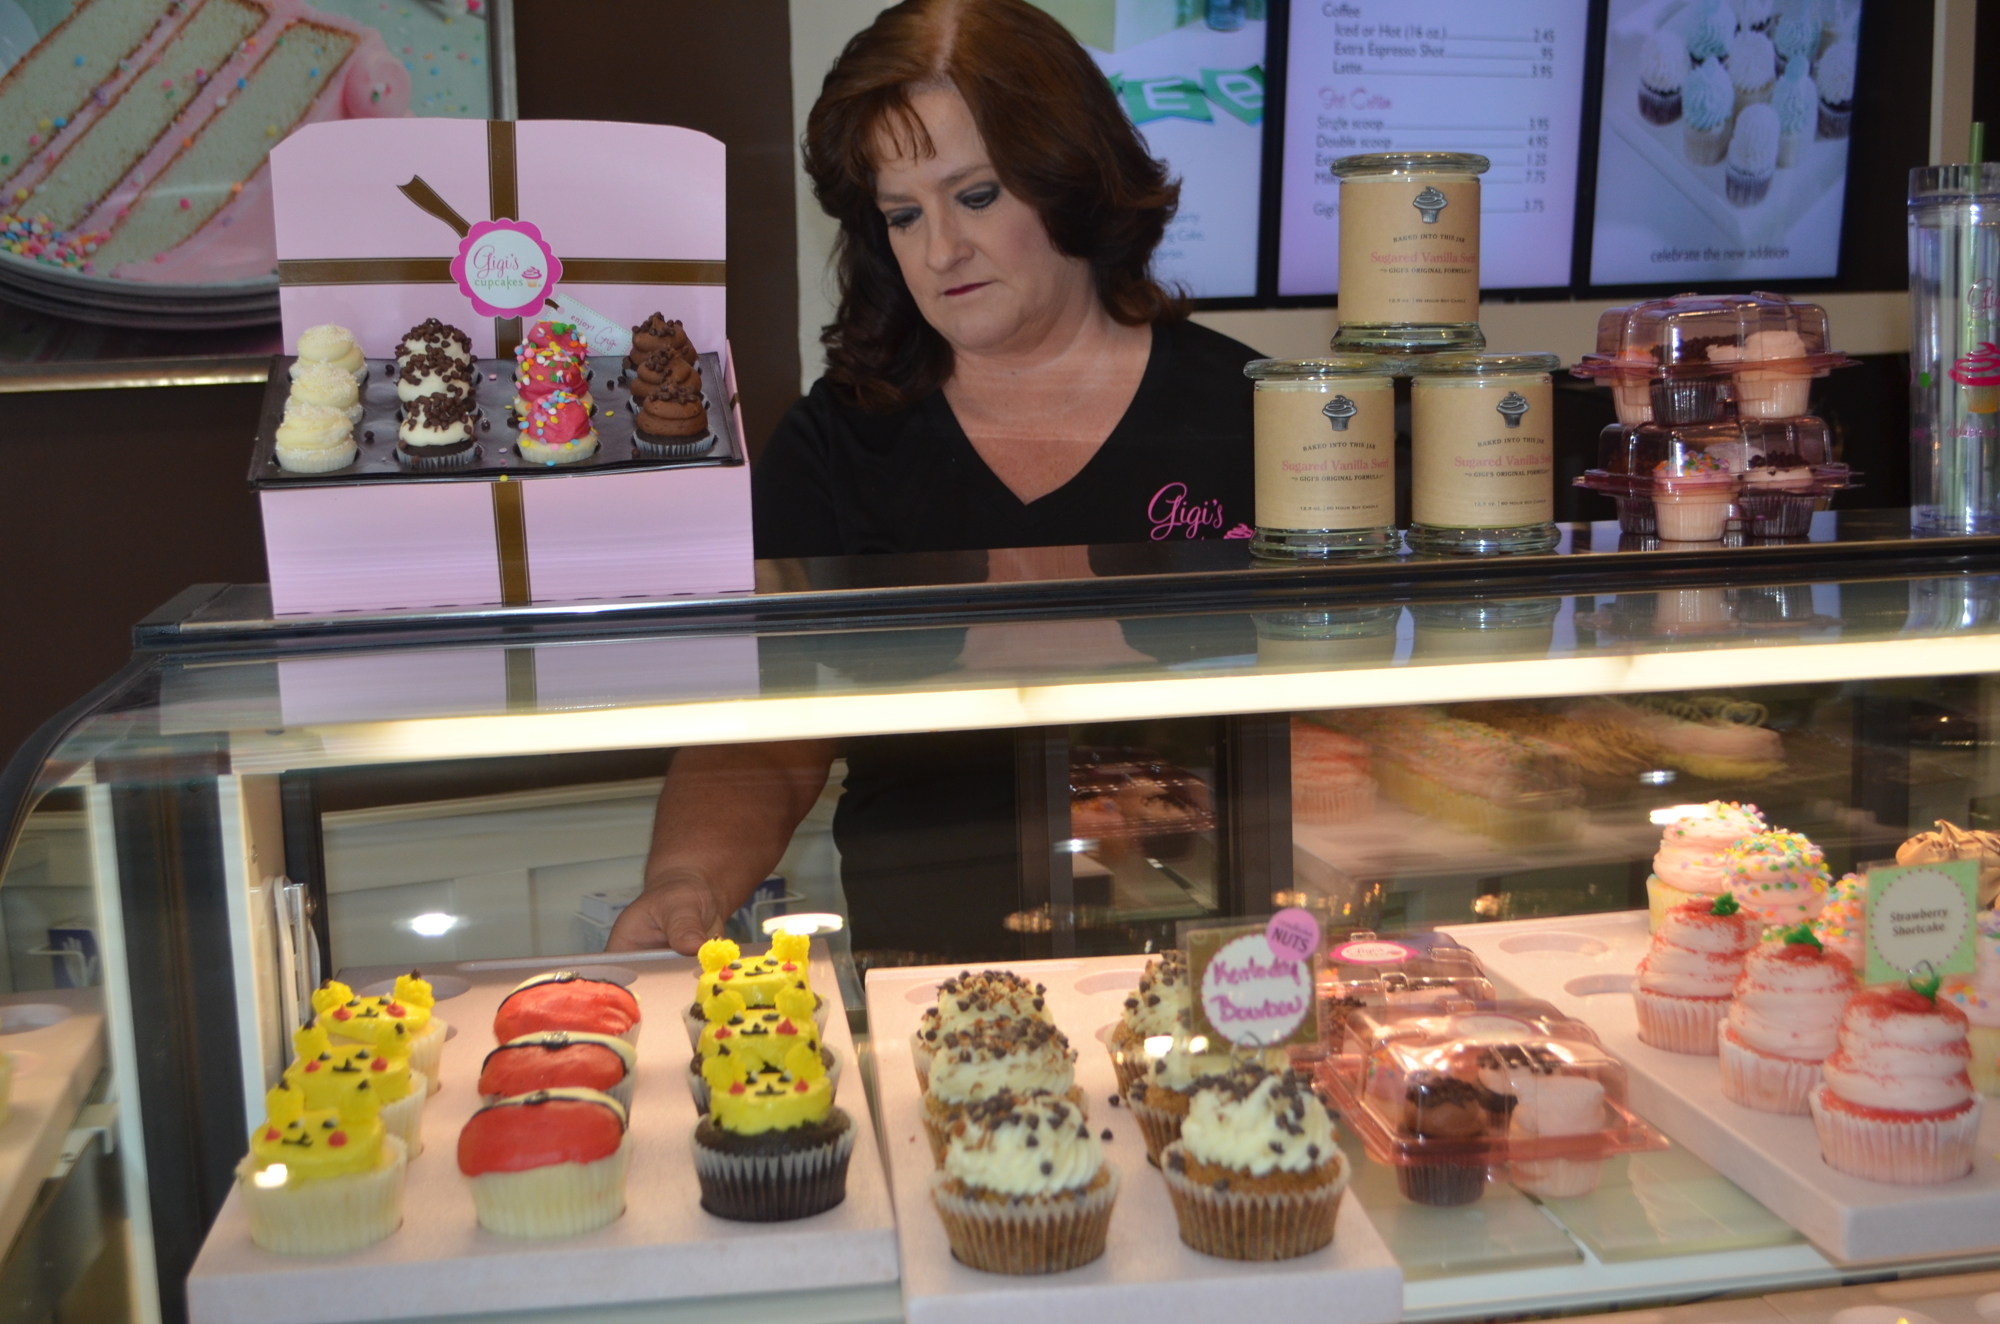 Dorrie Rubinstein puts the Pokémon cupcakes on display. The cupcakes have been a big hit for the shop, which is a gym on Pokemon Go.